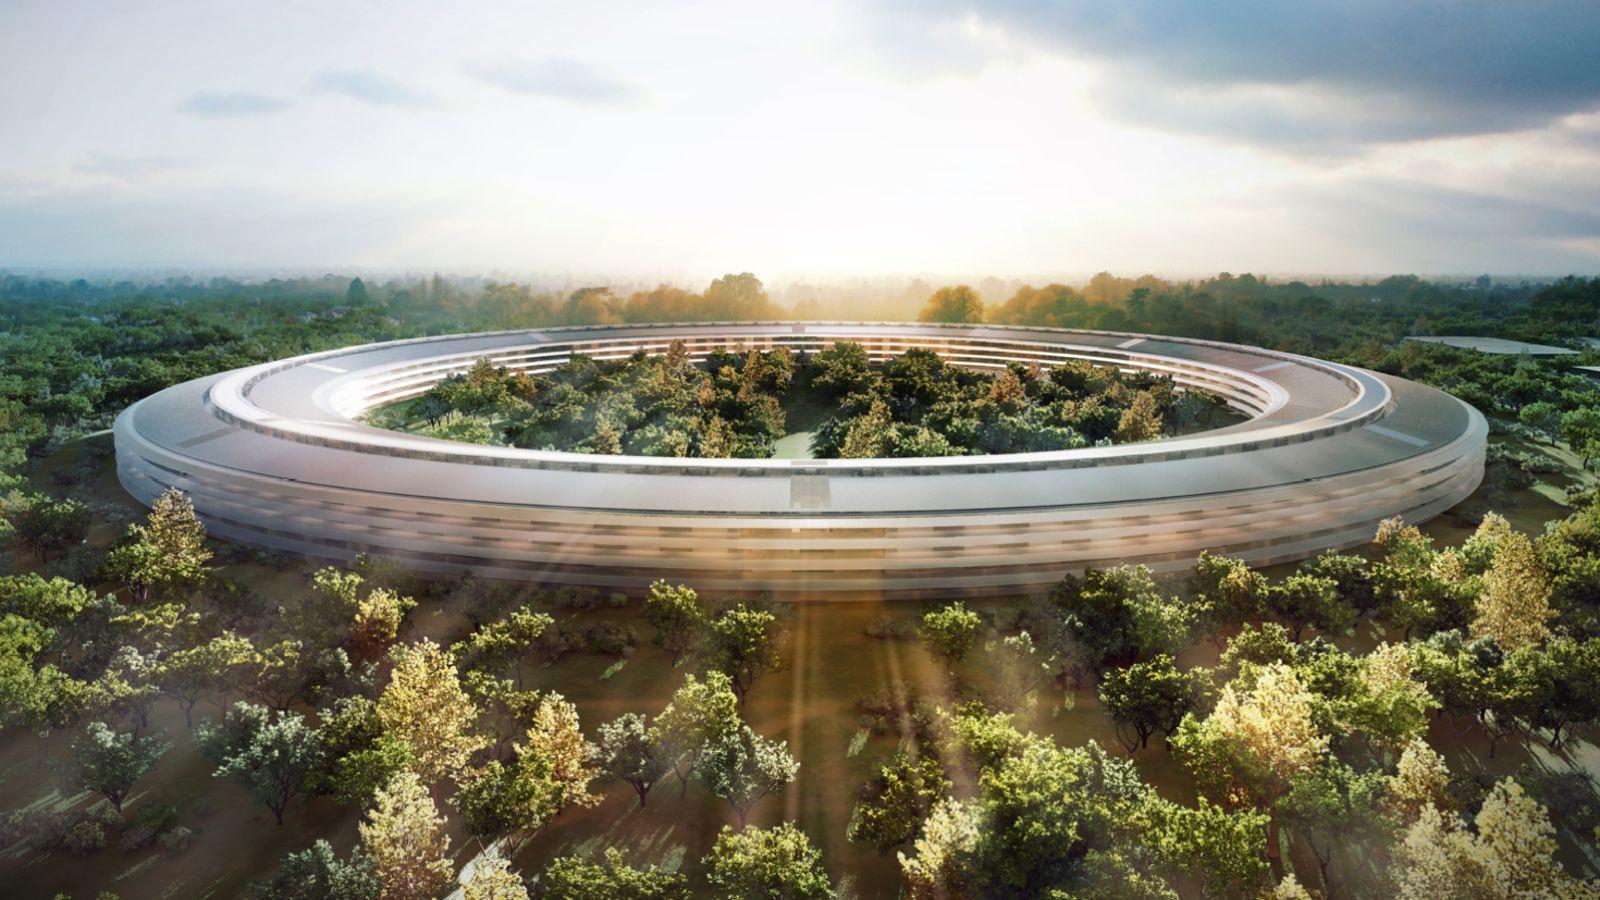 Employees of Apple Park complain that they constantly crash into glass walls